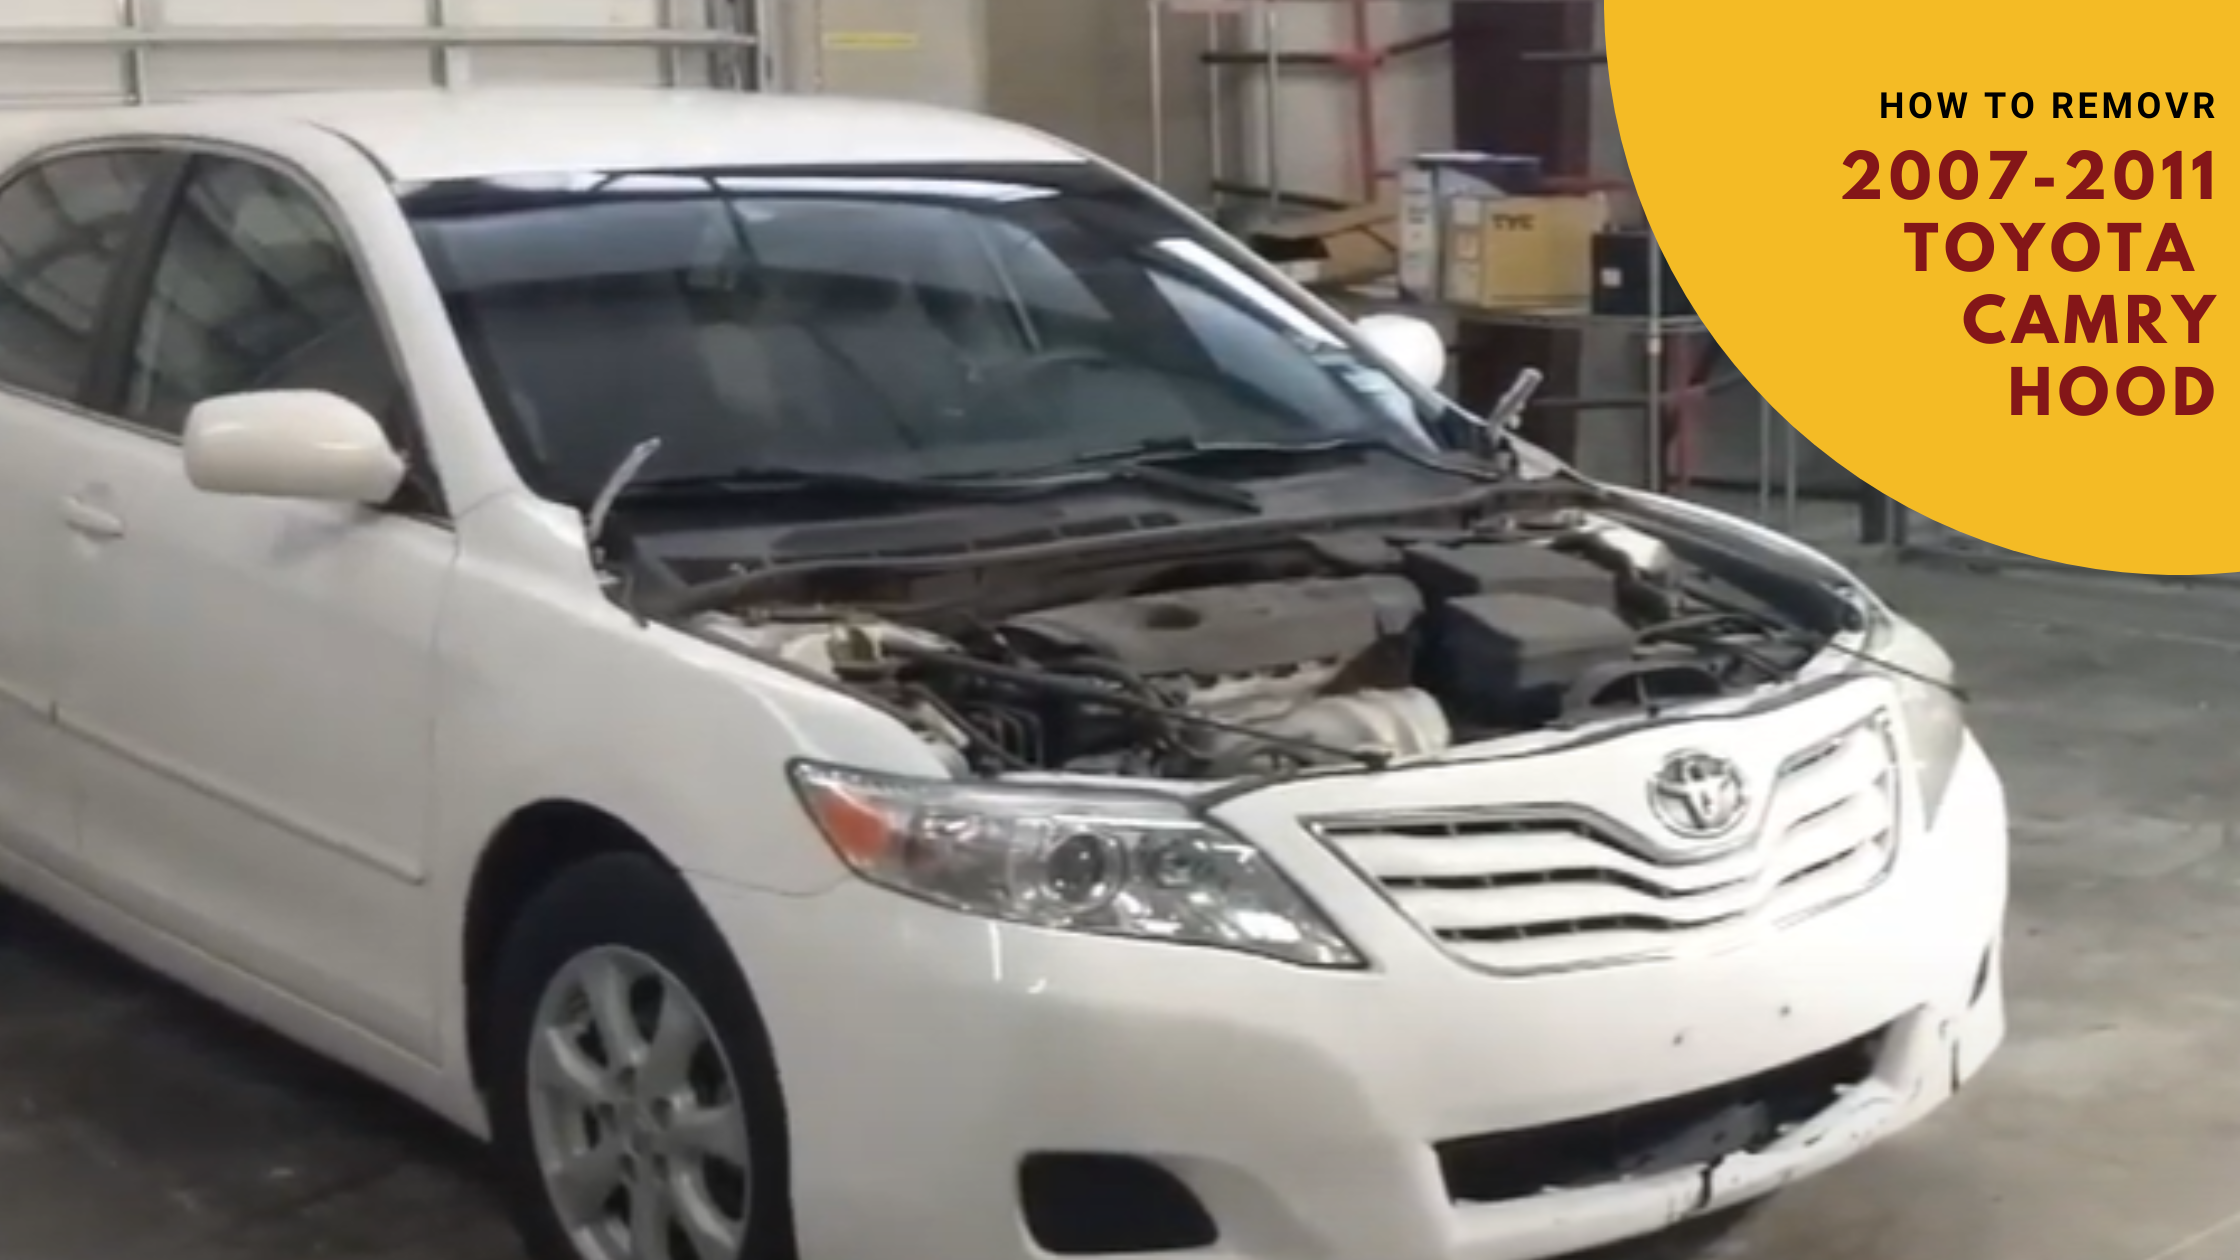 How to Remove a 2007-2011 Toyota Camry Hood